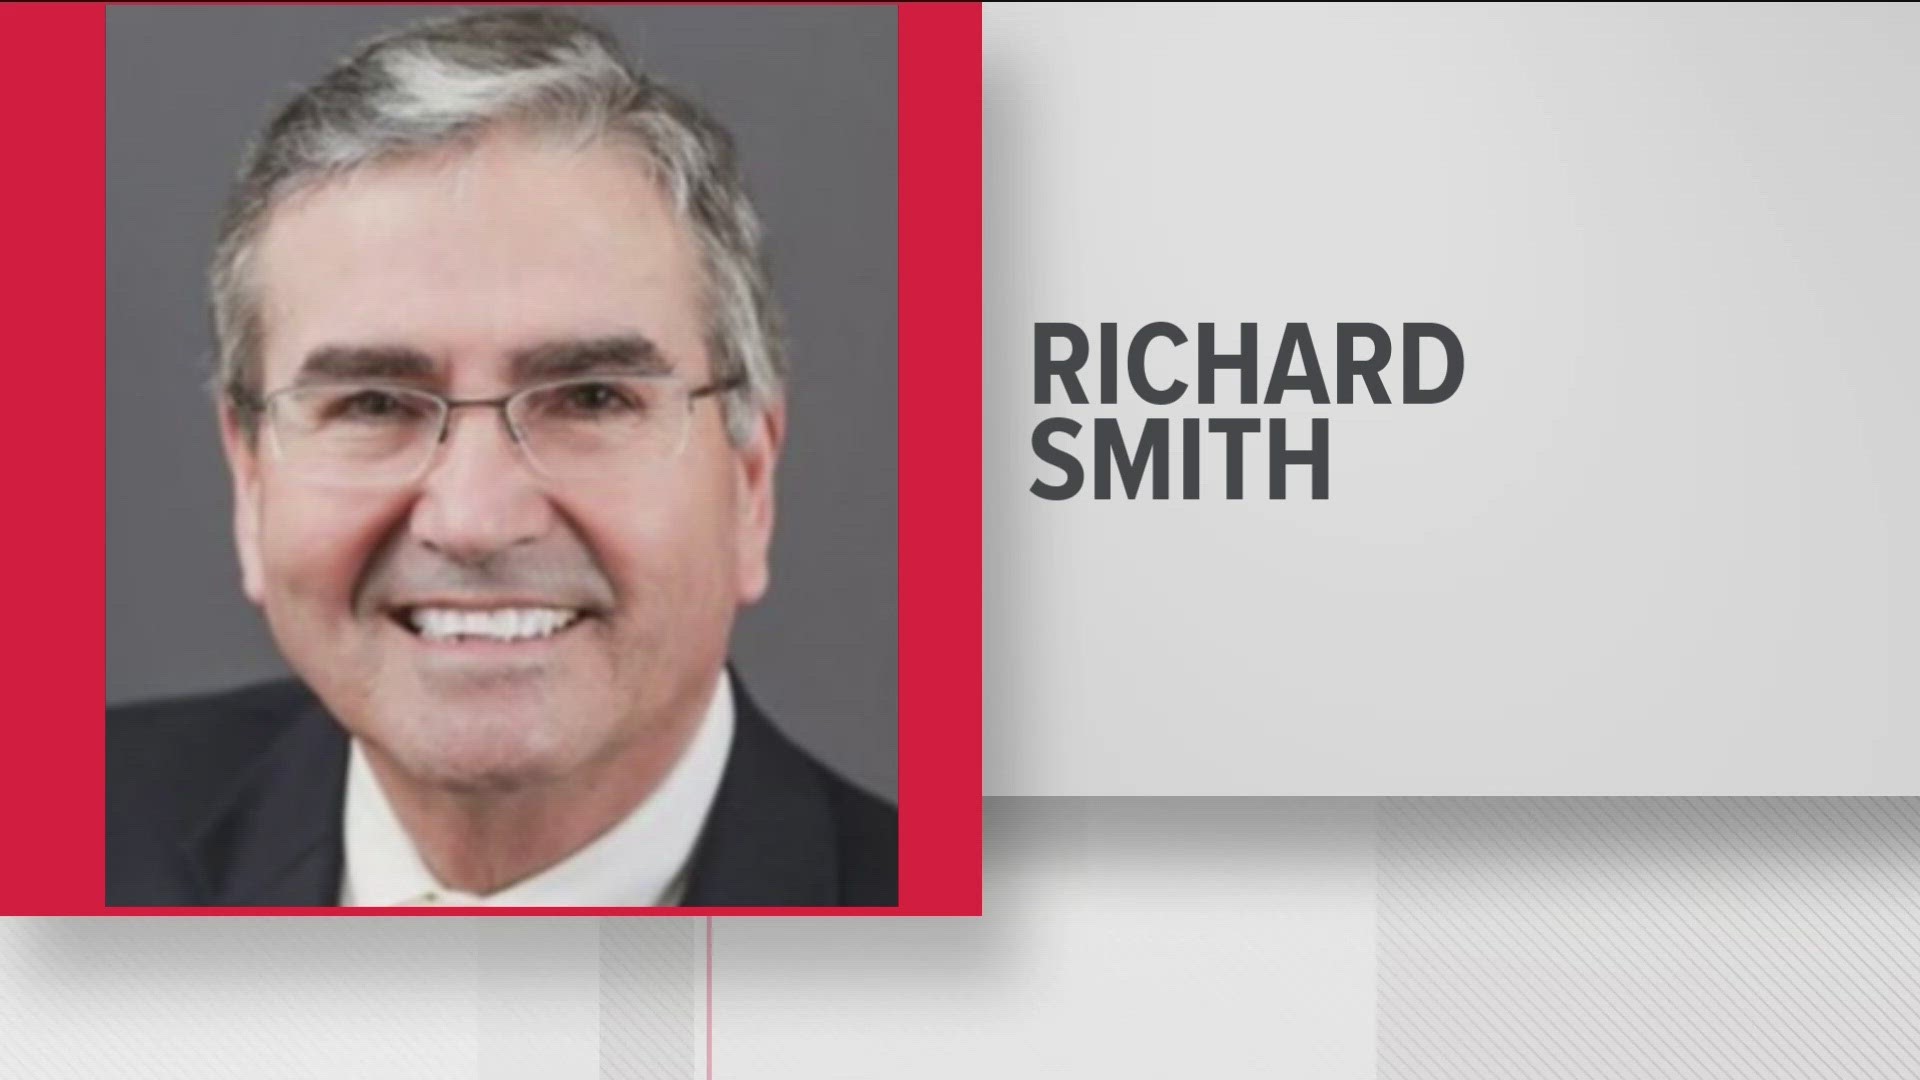 Smith, a 78-year-old Republican from Columbus, died shortly after contracting the flu.